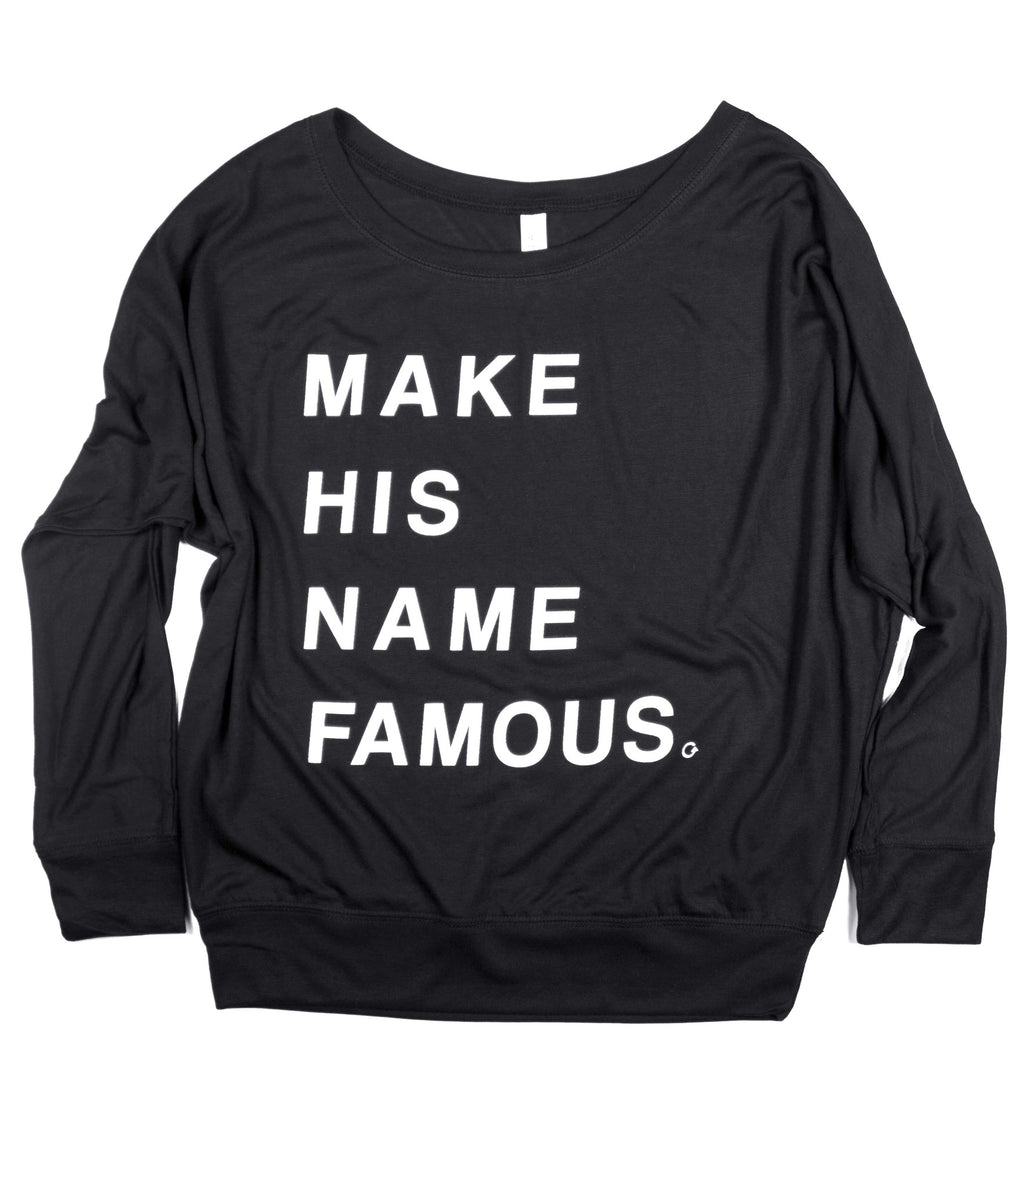 MAKE HIS NAME FAMOUS WOMEN'S BLACK OFF THE SHOULDER FLOWY LONG-SLEEVE